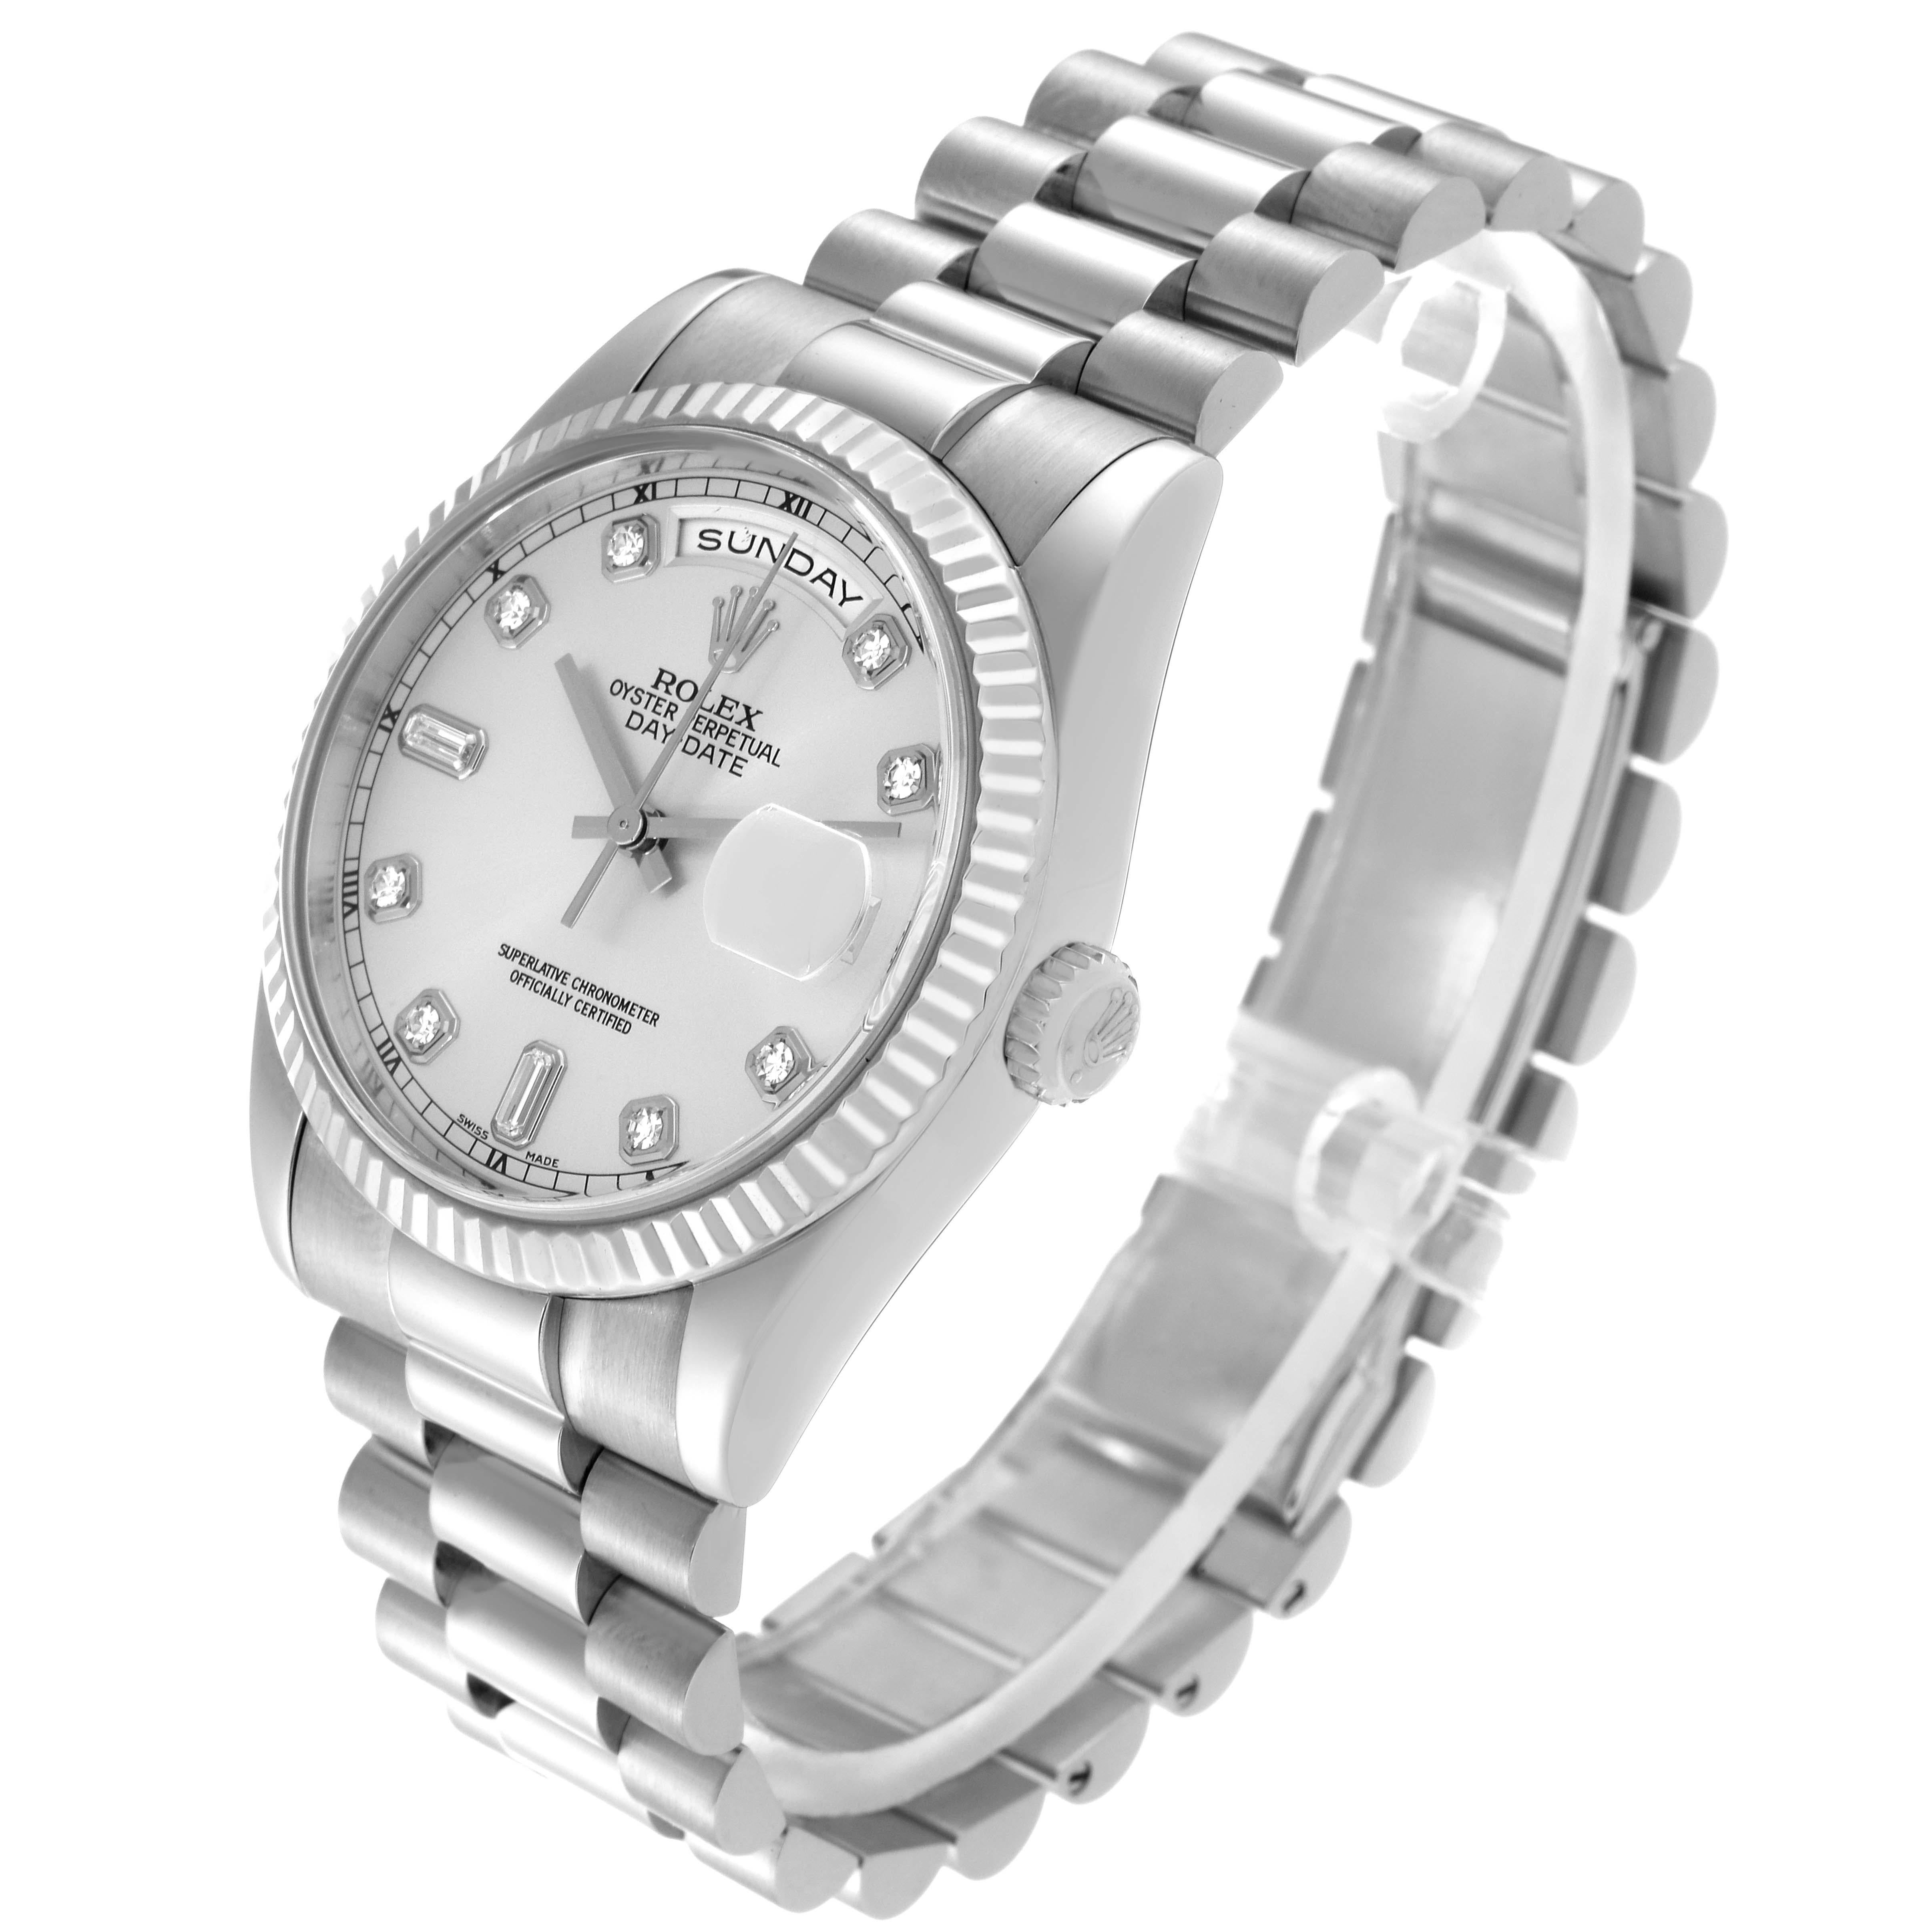 Rolex President Day-Date White Gold Diamond Dial Mens Watch 118239 For Sale 5